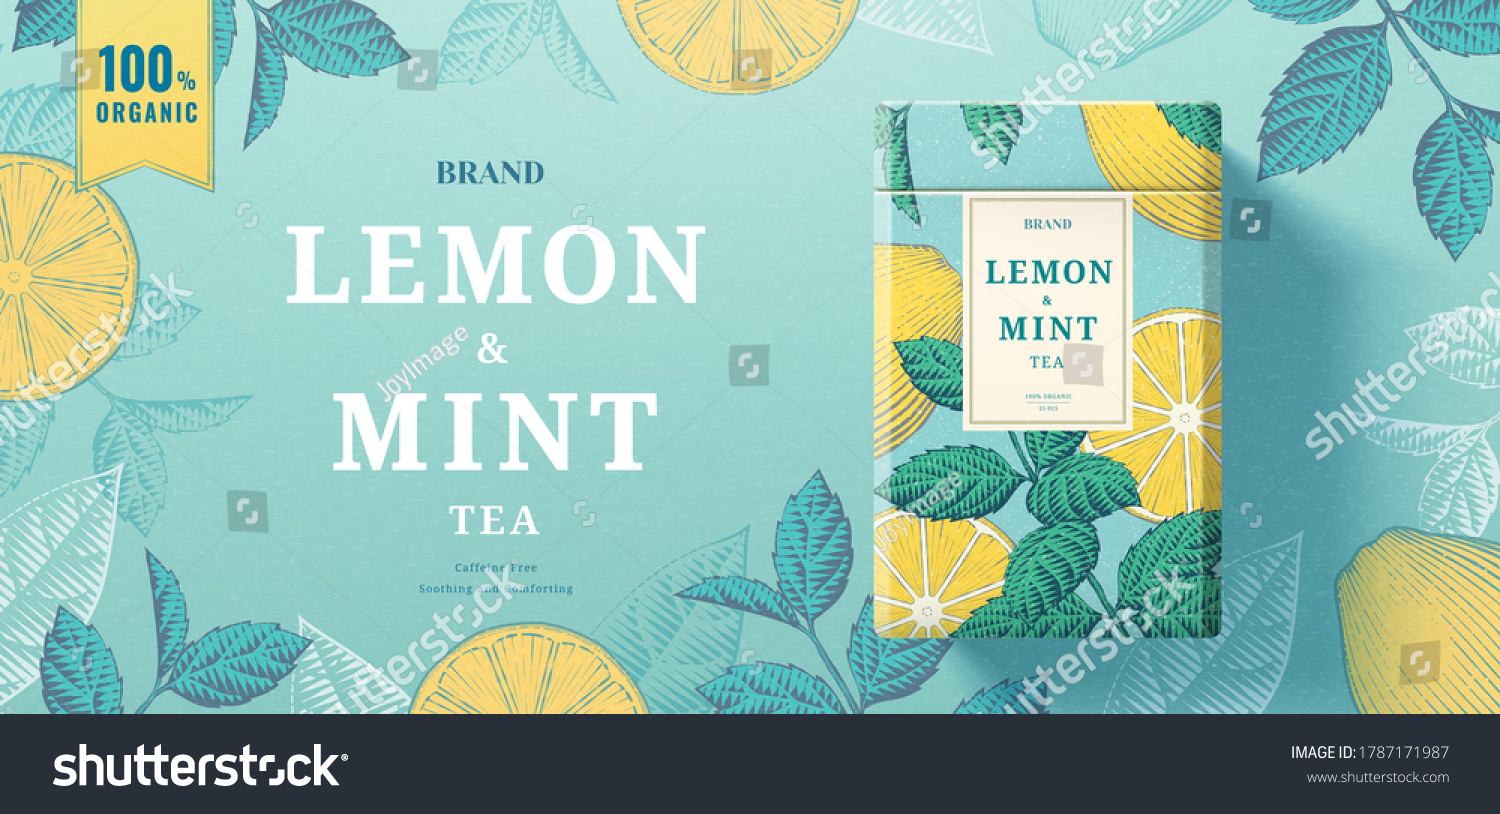 Lemon mint tea paper can packaging lying on exquisite engraving banner background #1787171987